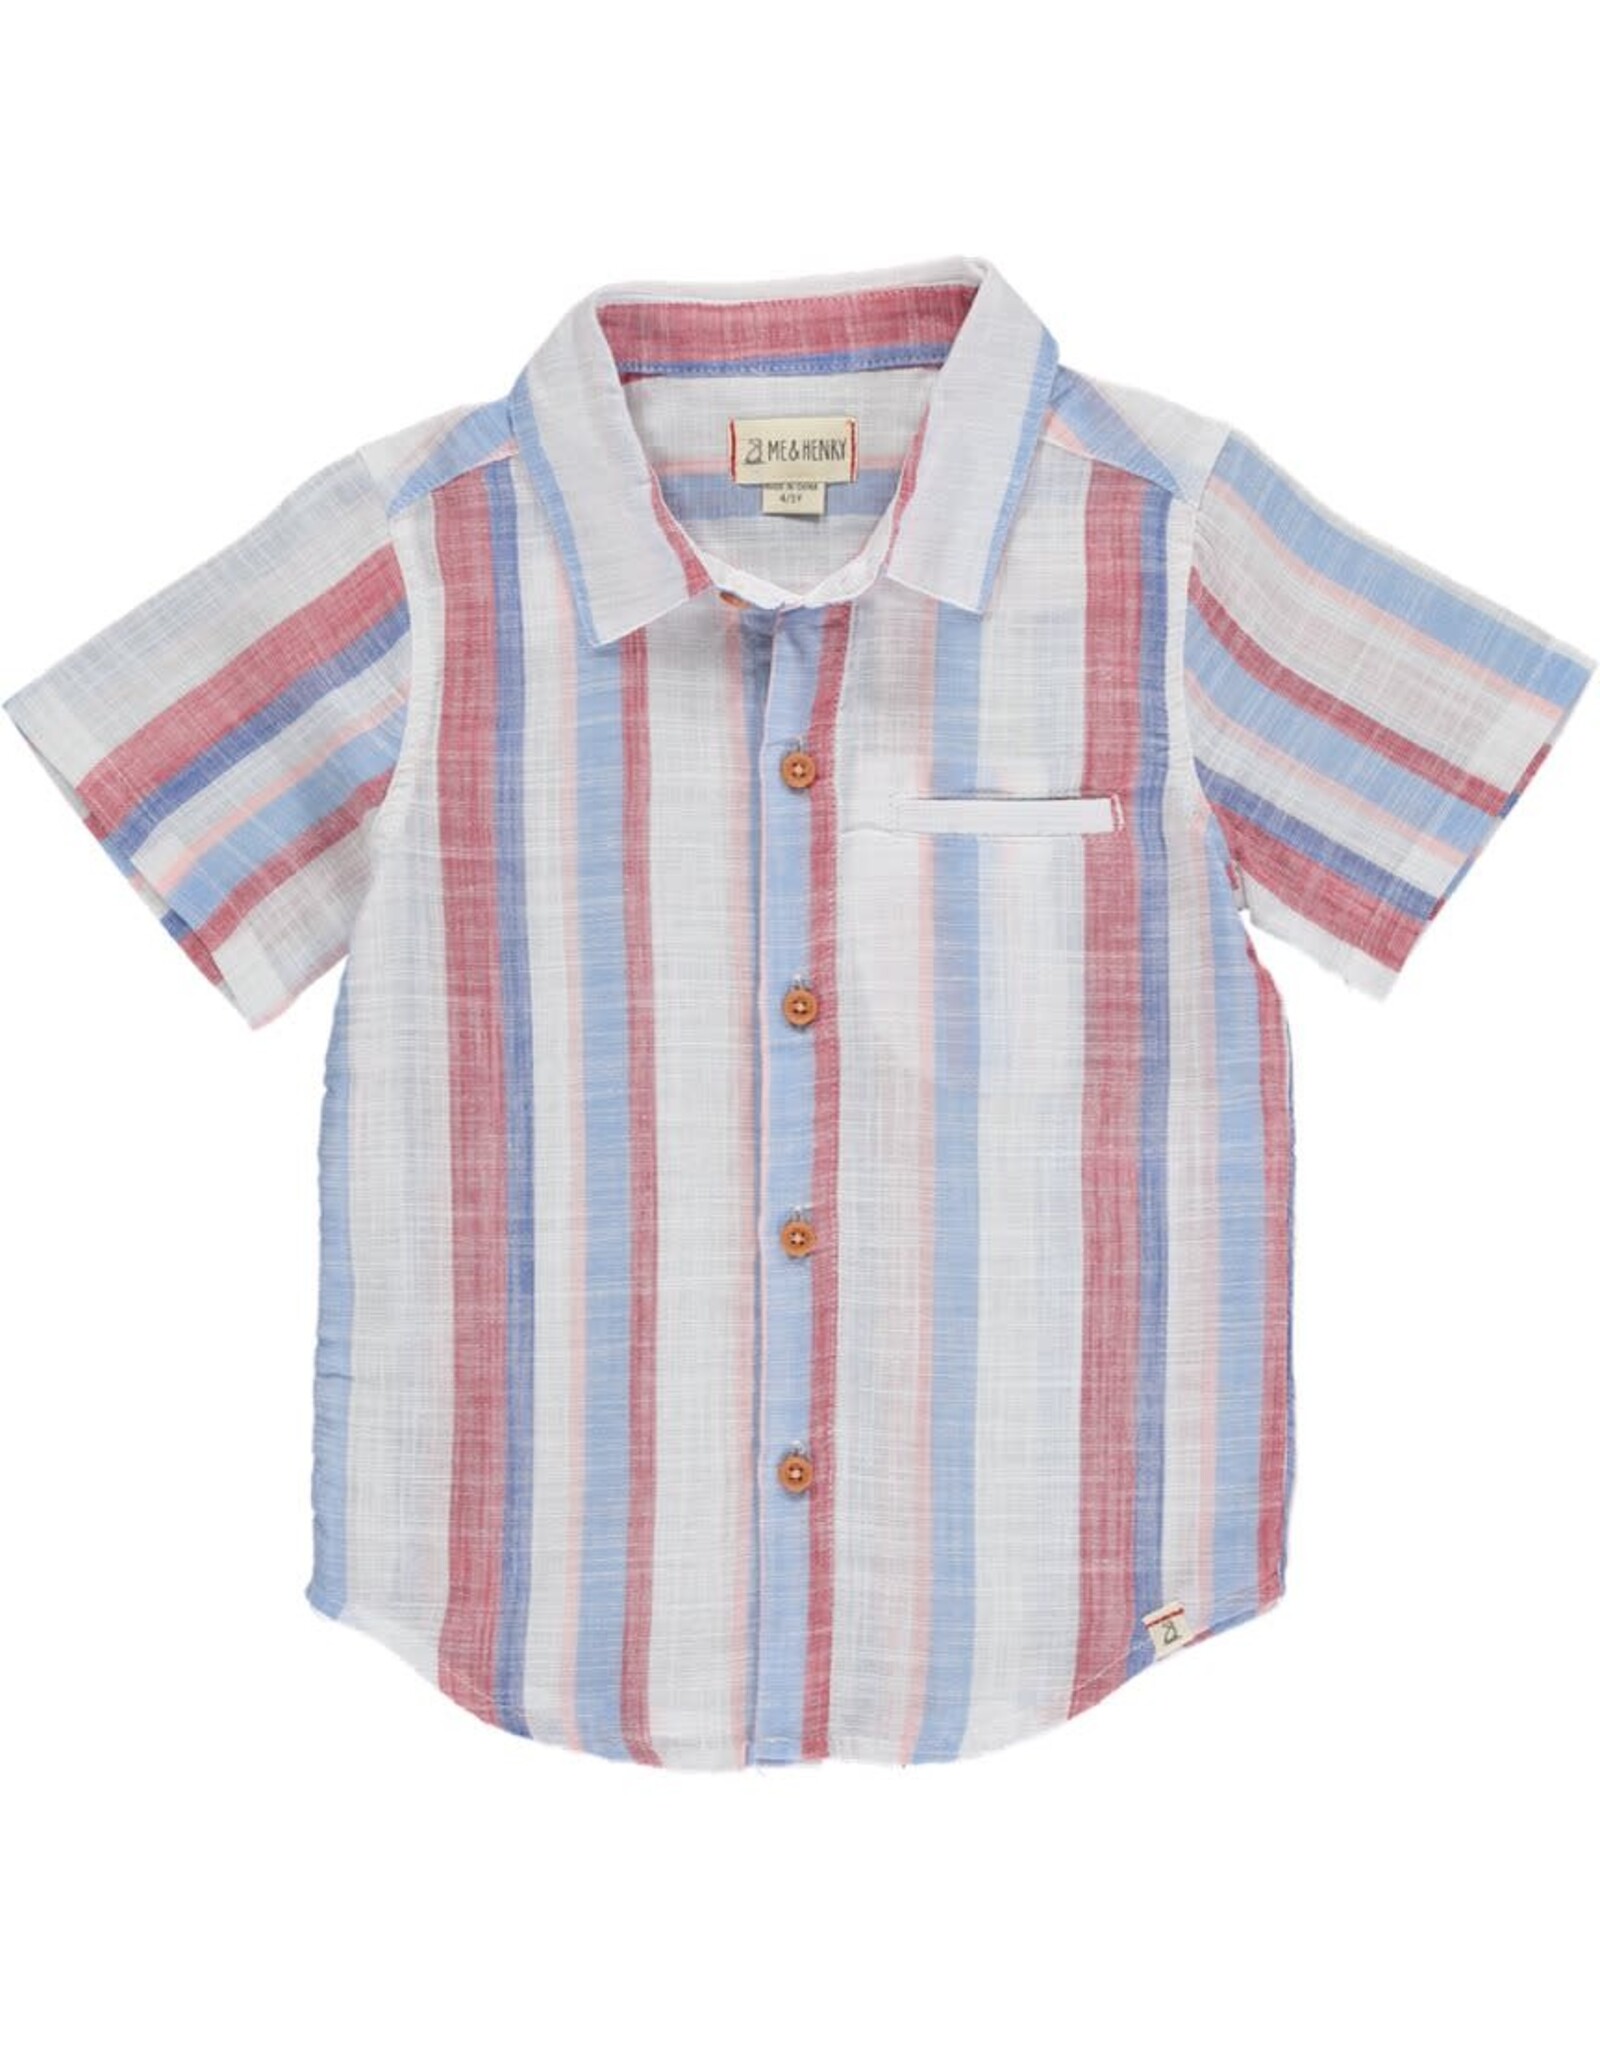 Me & Henry  Maui Red/White/Blue Woven Baby Shirt